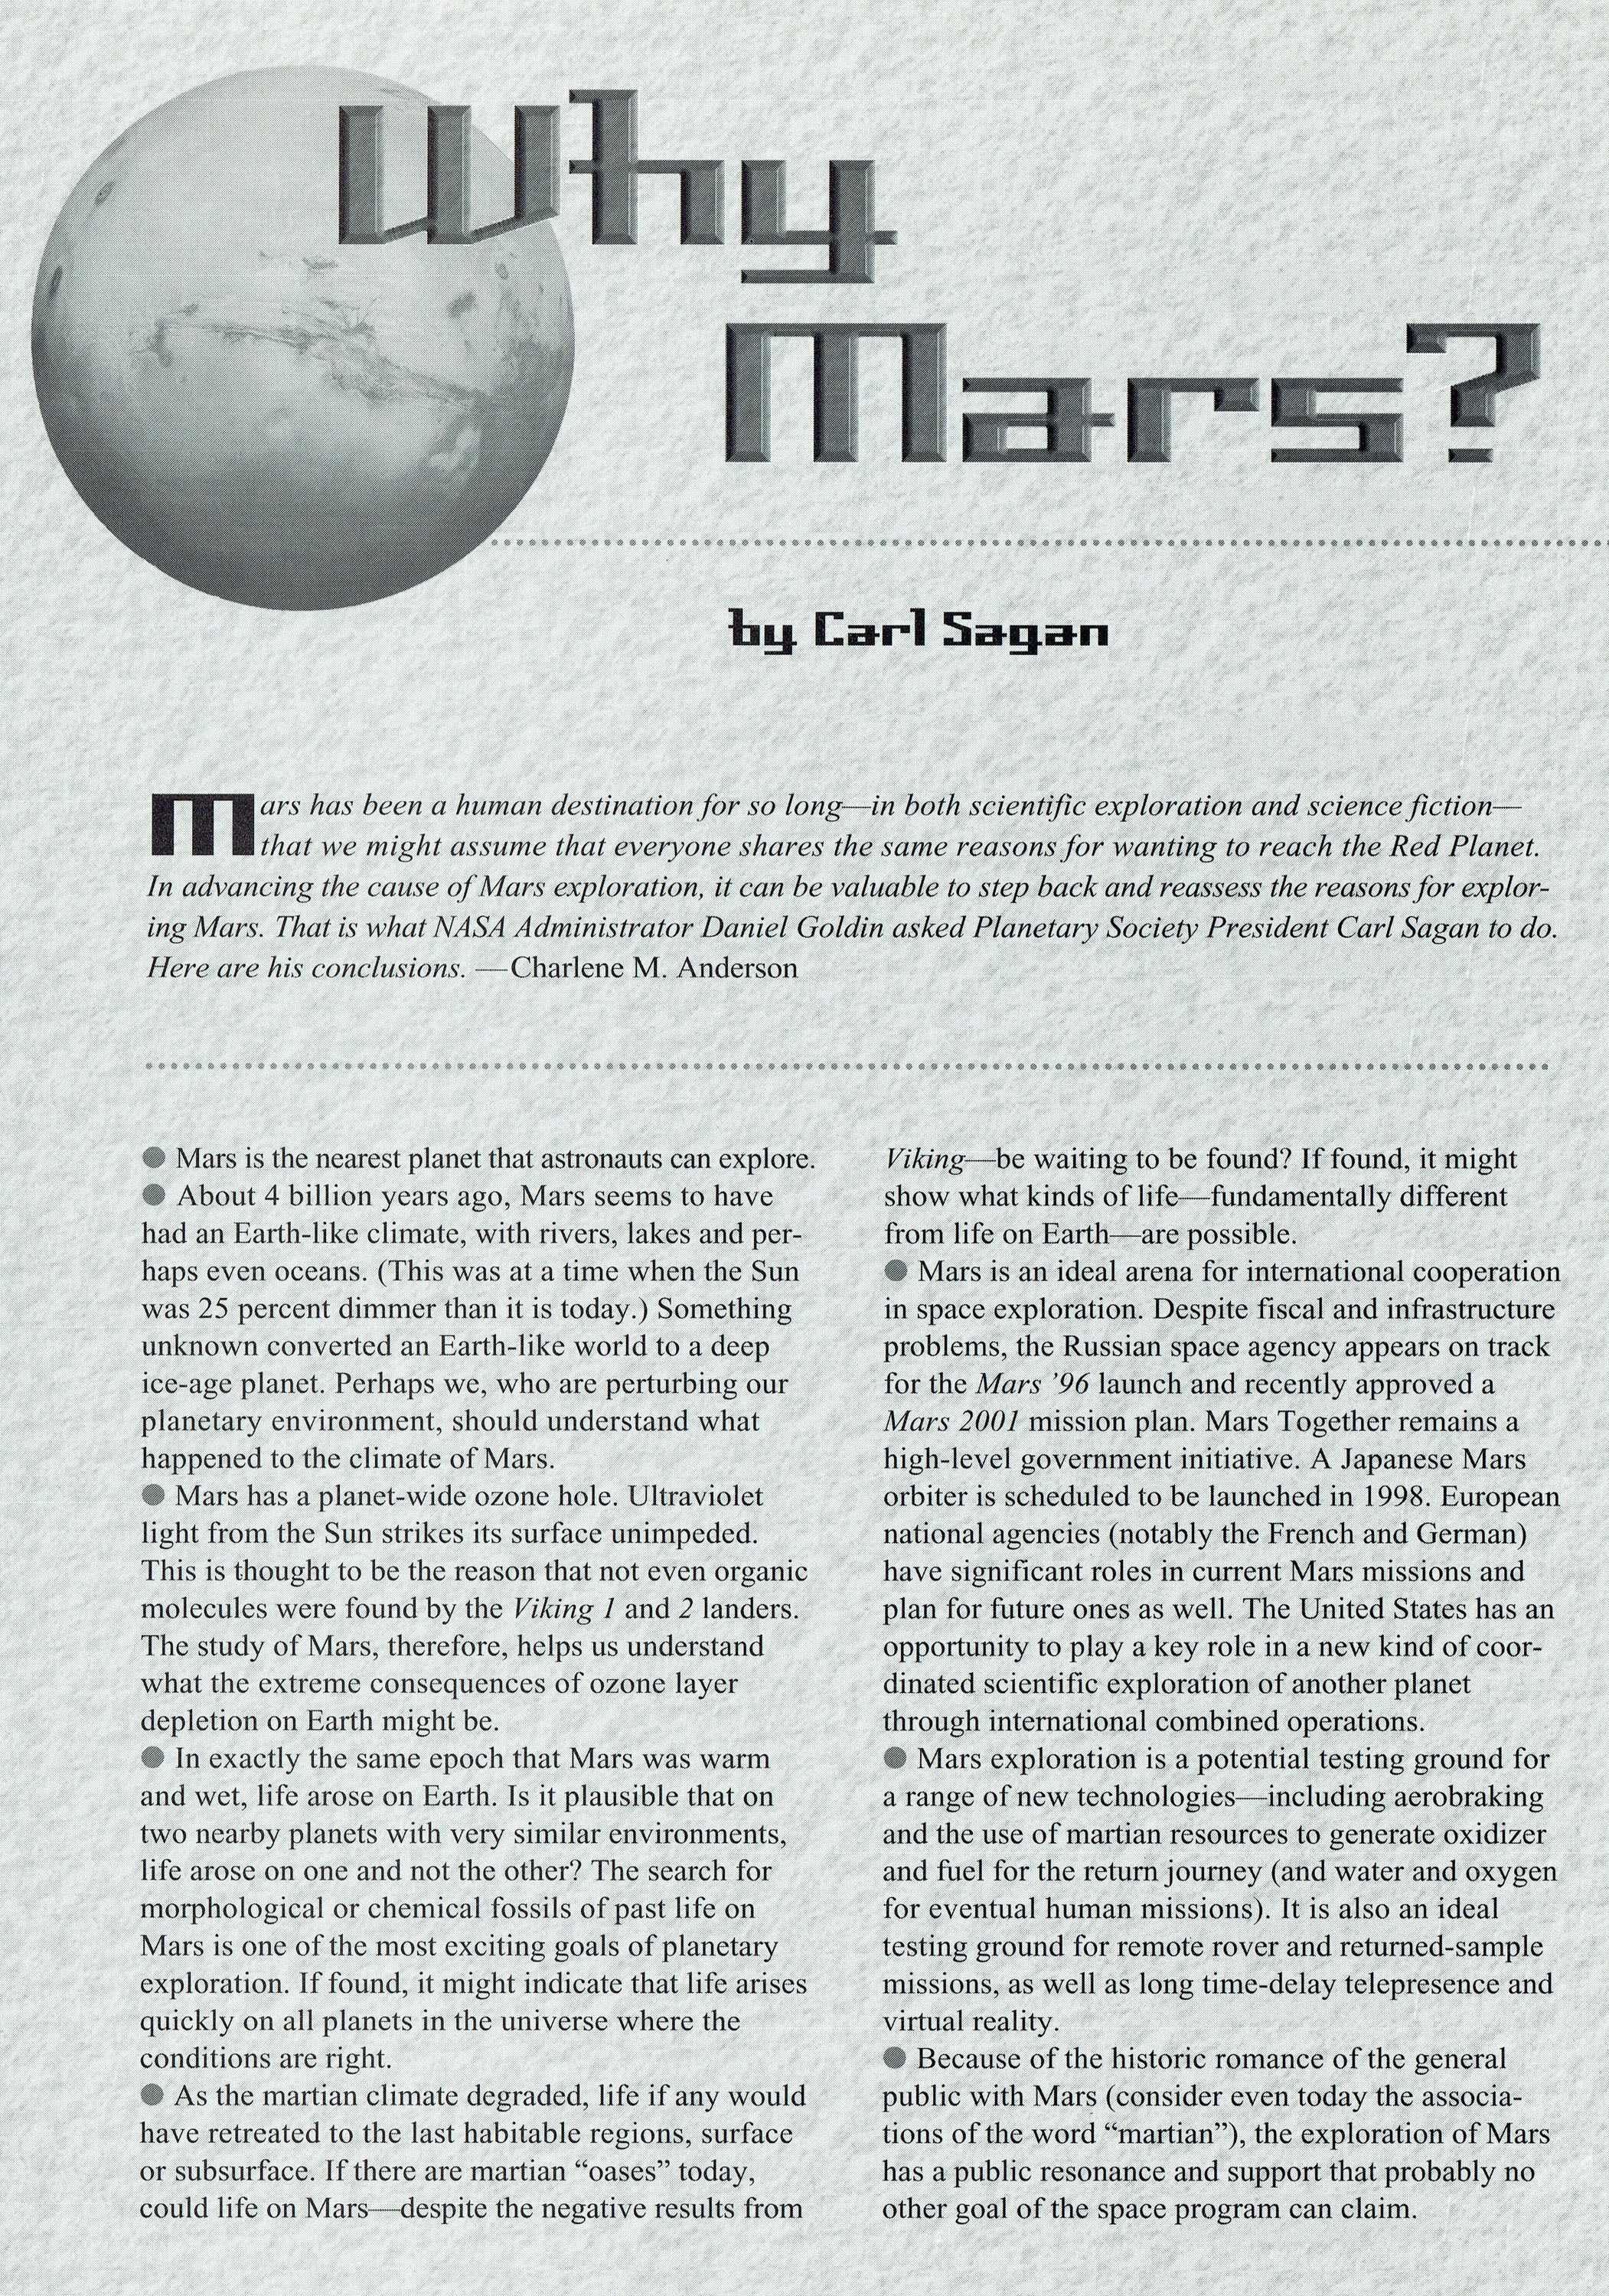 research based argumentative essay for or against travel to mars